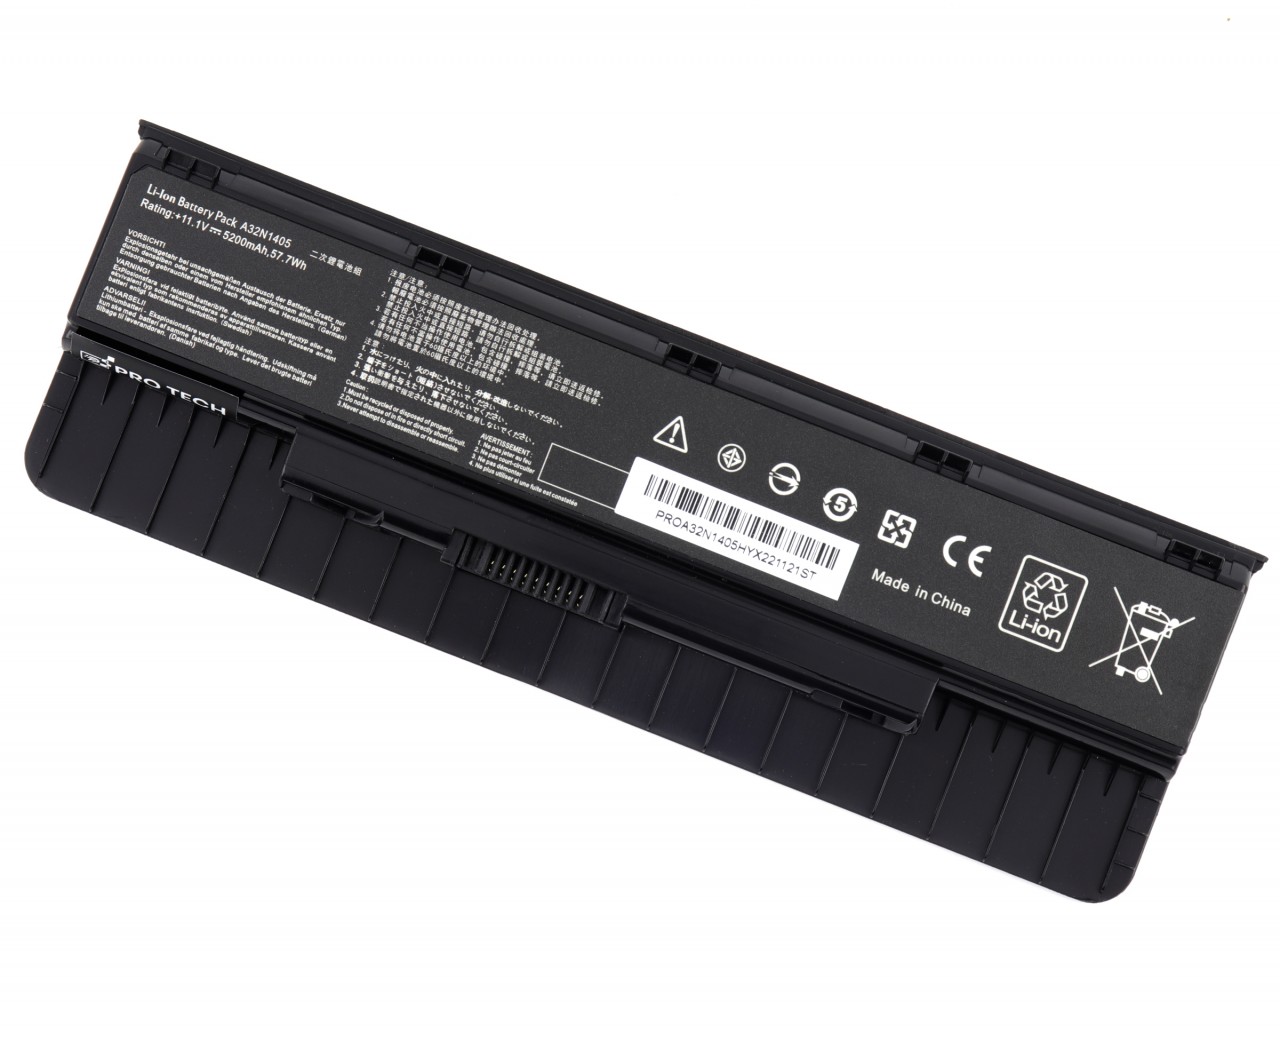 Baterie Asus N751JK 57.7Wh / 5200mAh Protech High Quality Replacement